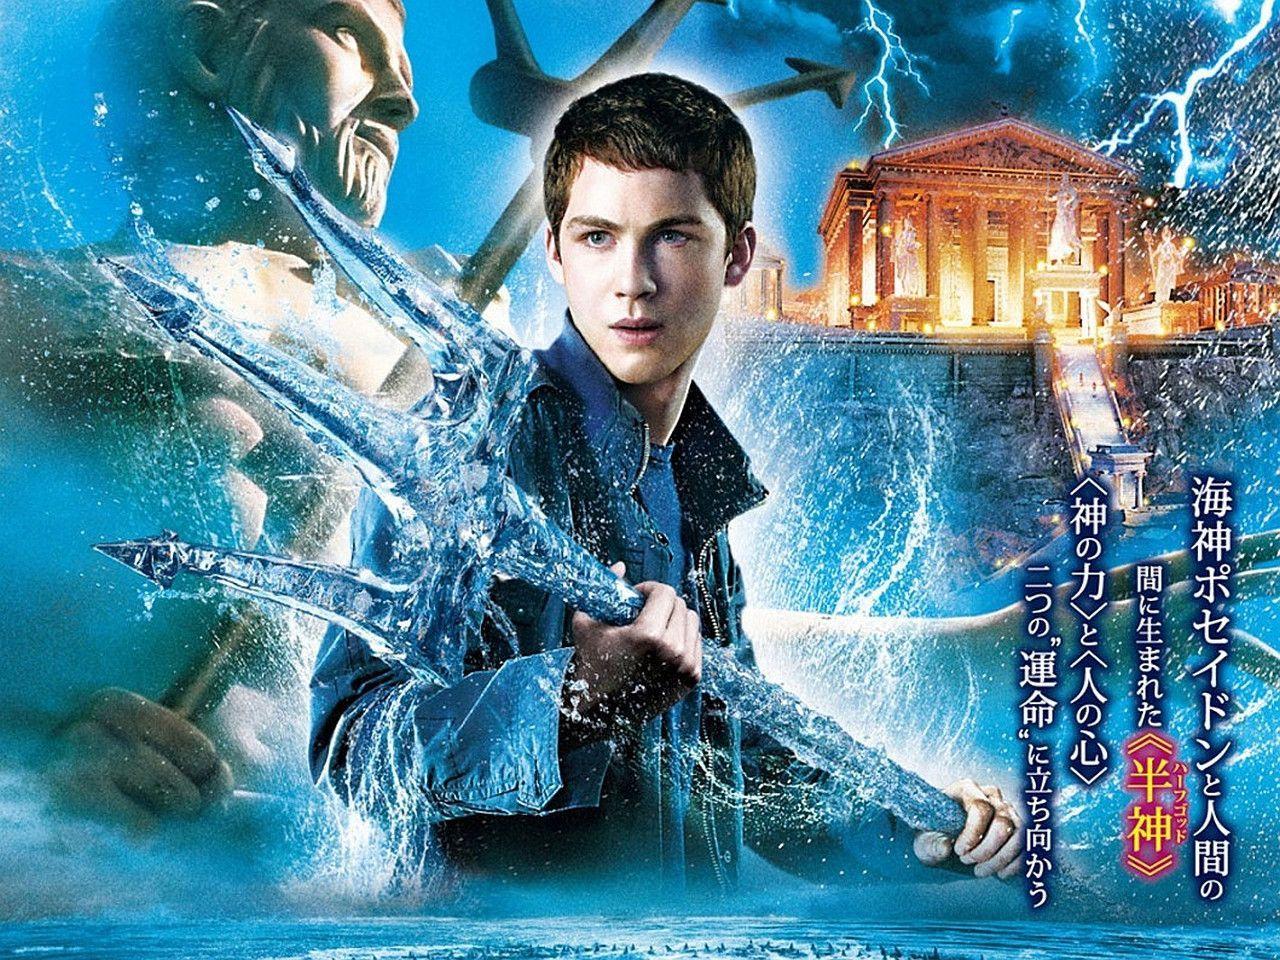 Percy Jackson: The Sea Of Monsters Wallpaper. Percy Jackson